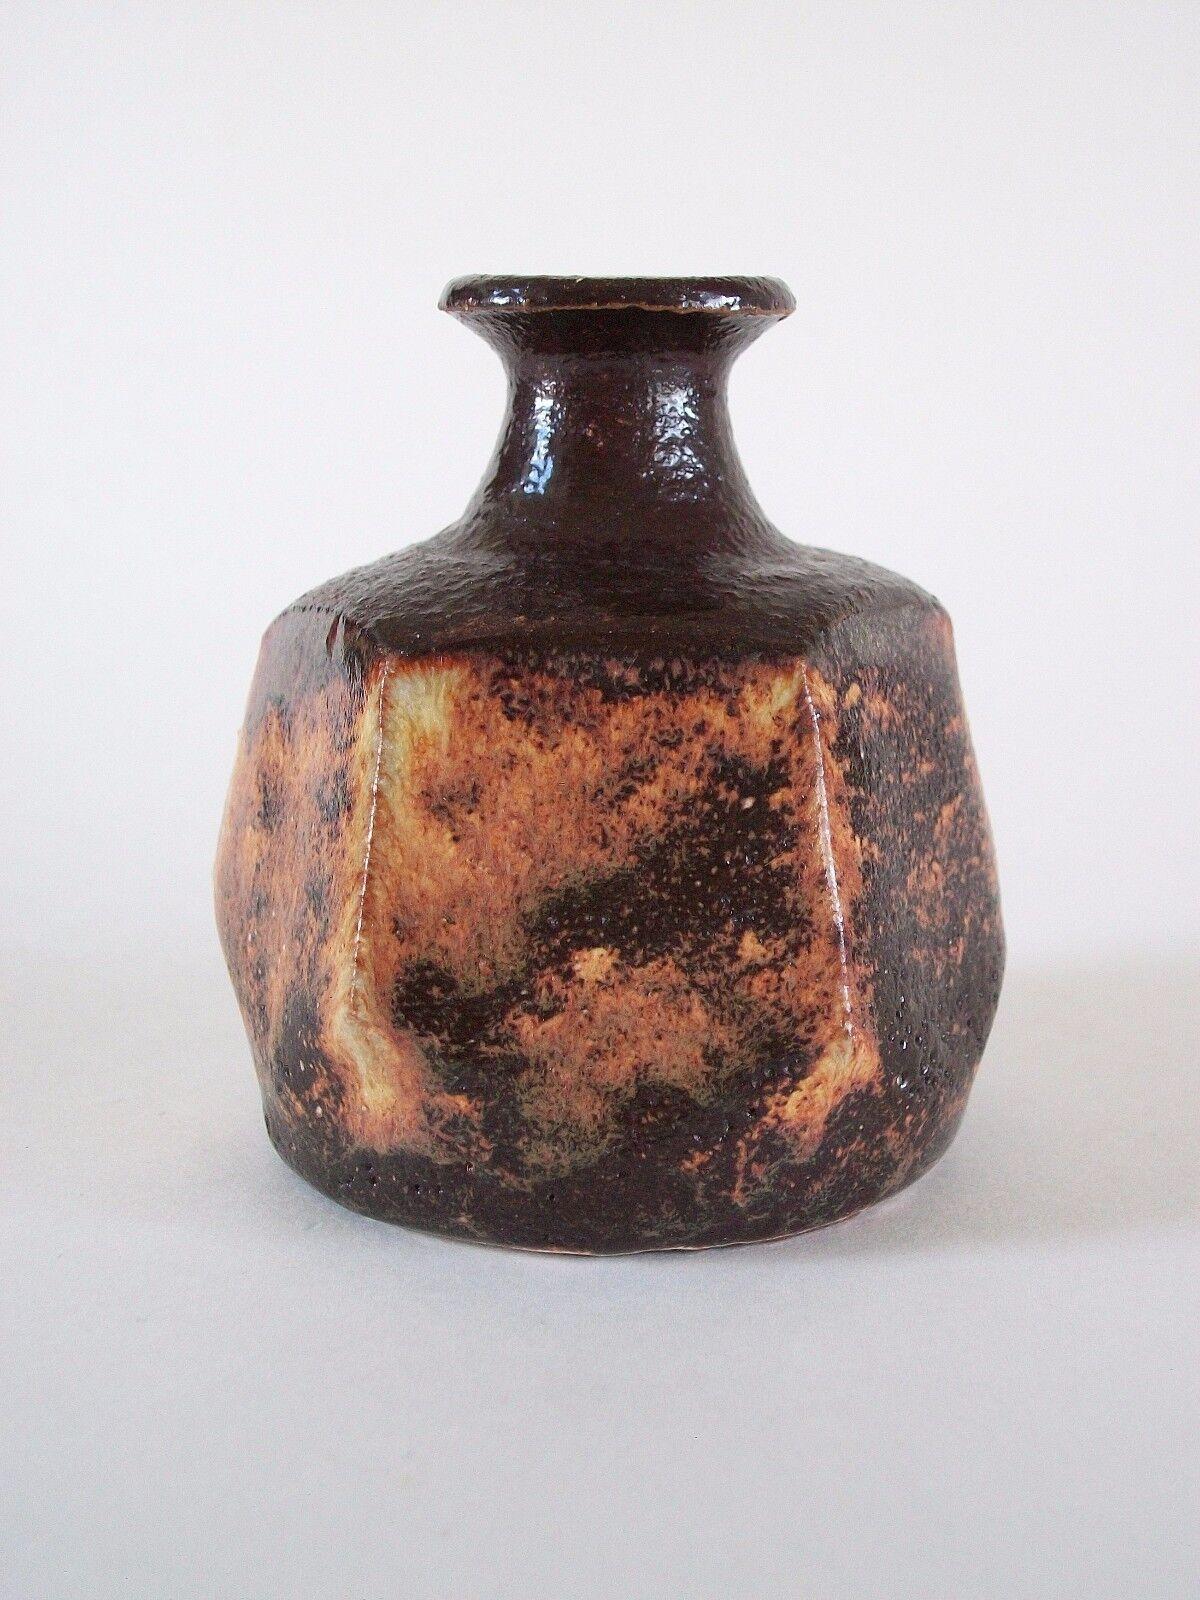 Vintage terracotta wheel thrown studio pottery bud vase with cut sides - thick gloss brown glaze over a white base - dramatic form - initialed on the base - Canada - mid 20th century.

Excellent vintage condition - no loss - no damage - no